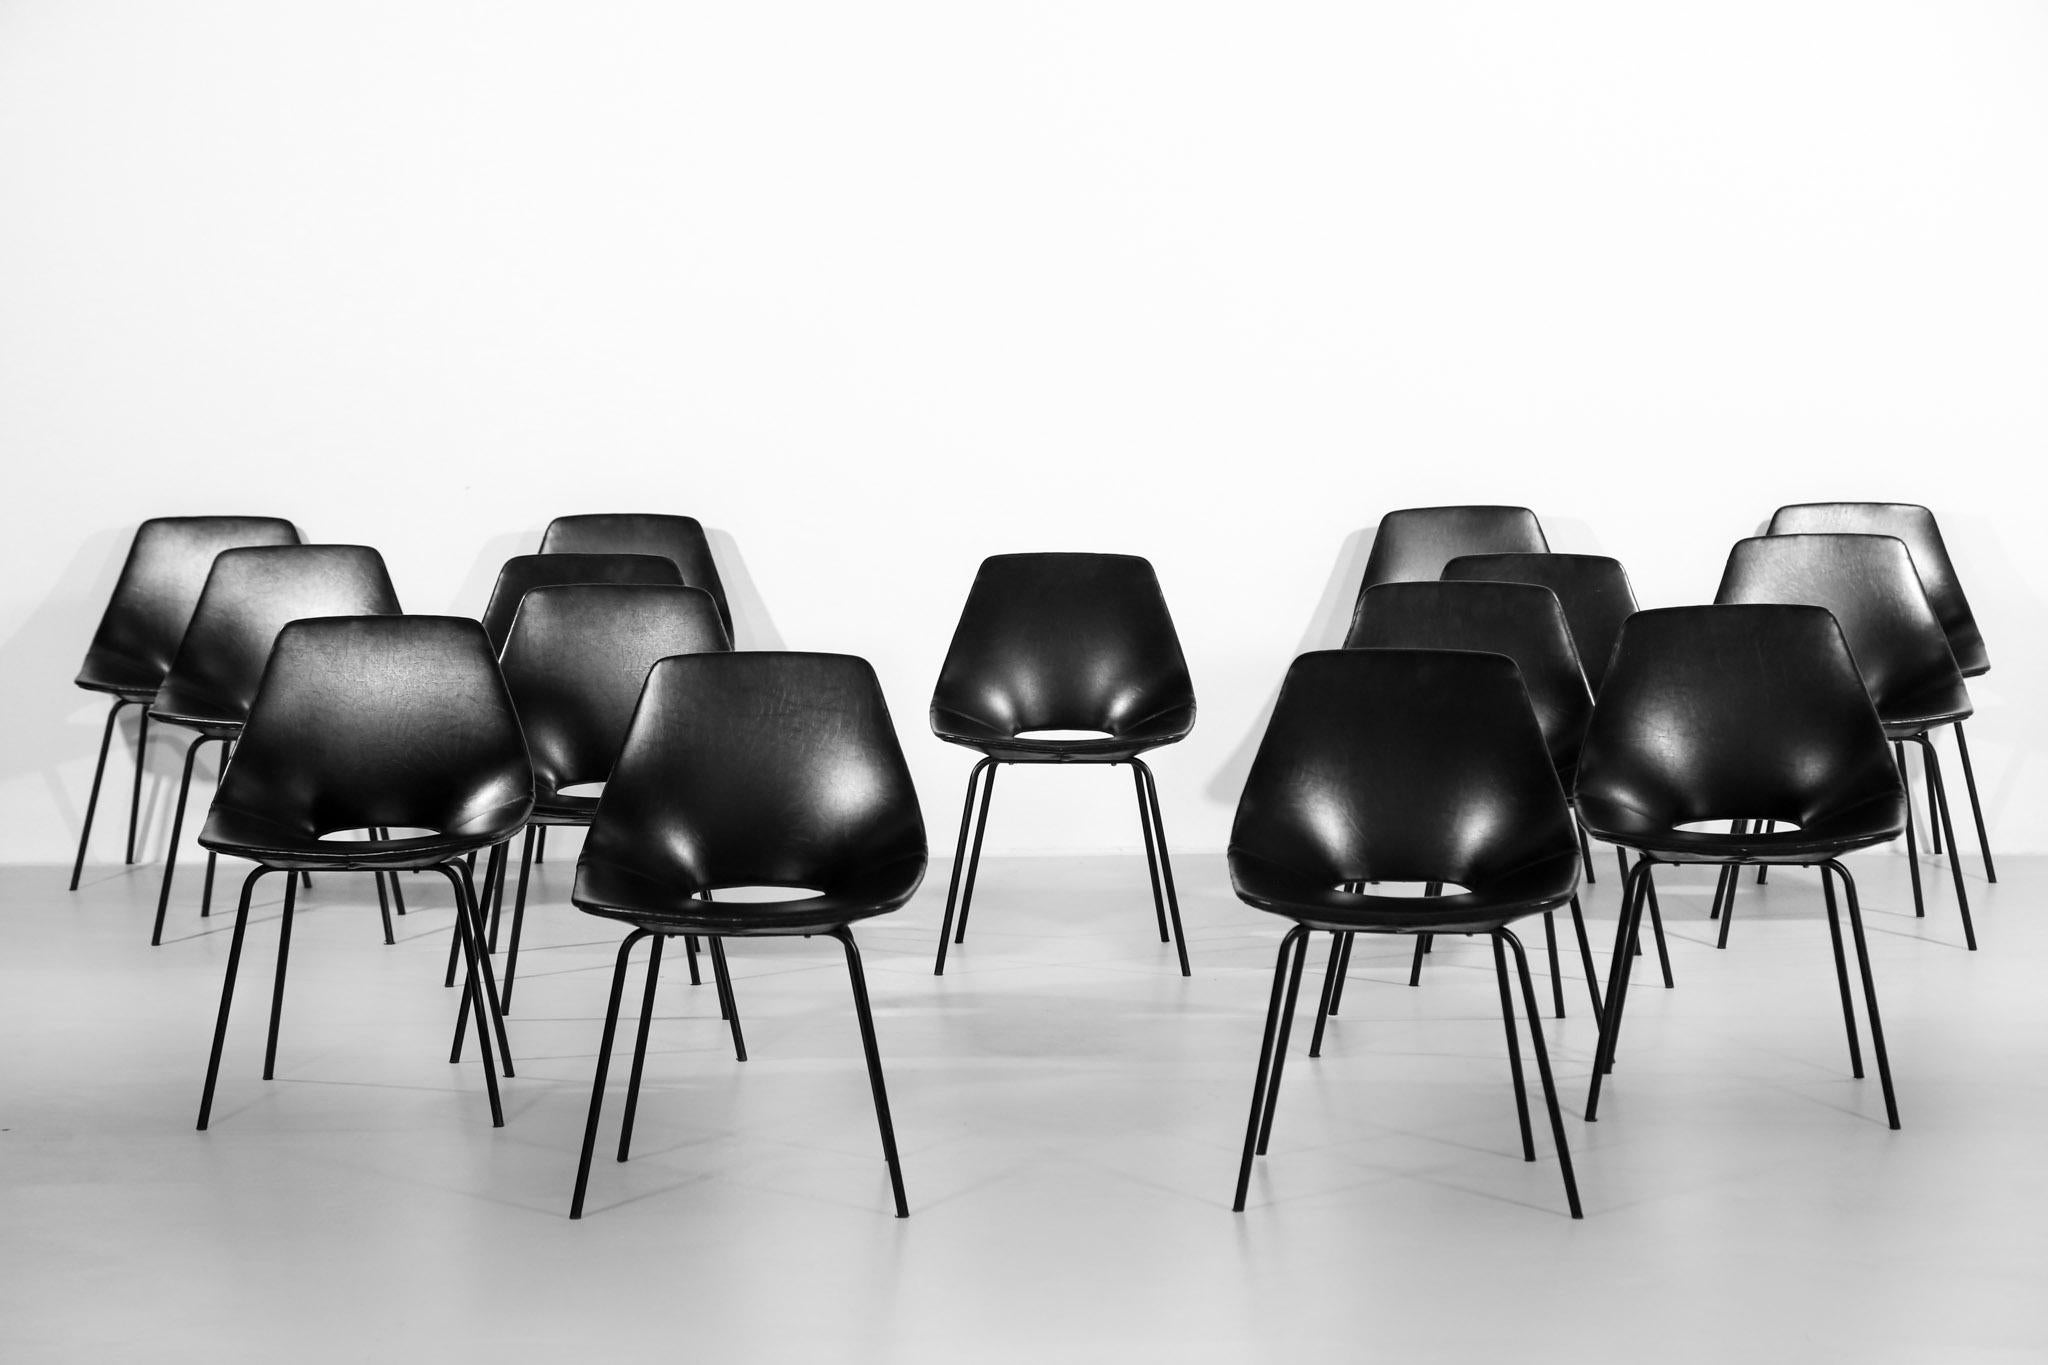 Tonneau Chairs by Pierre Guariche '16 Chairs' 1